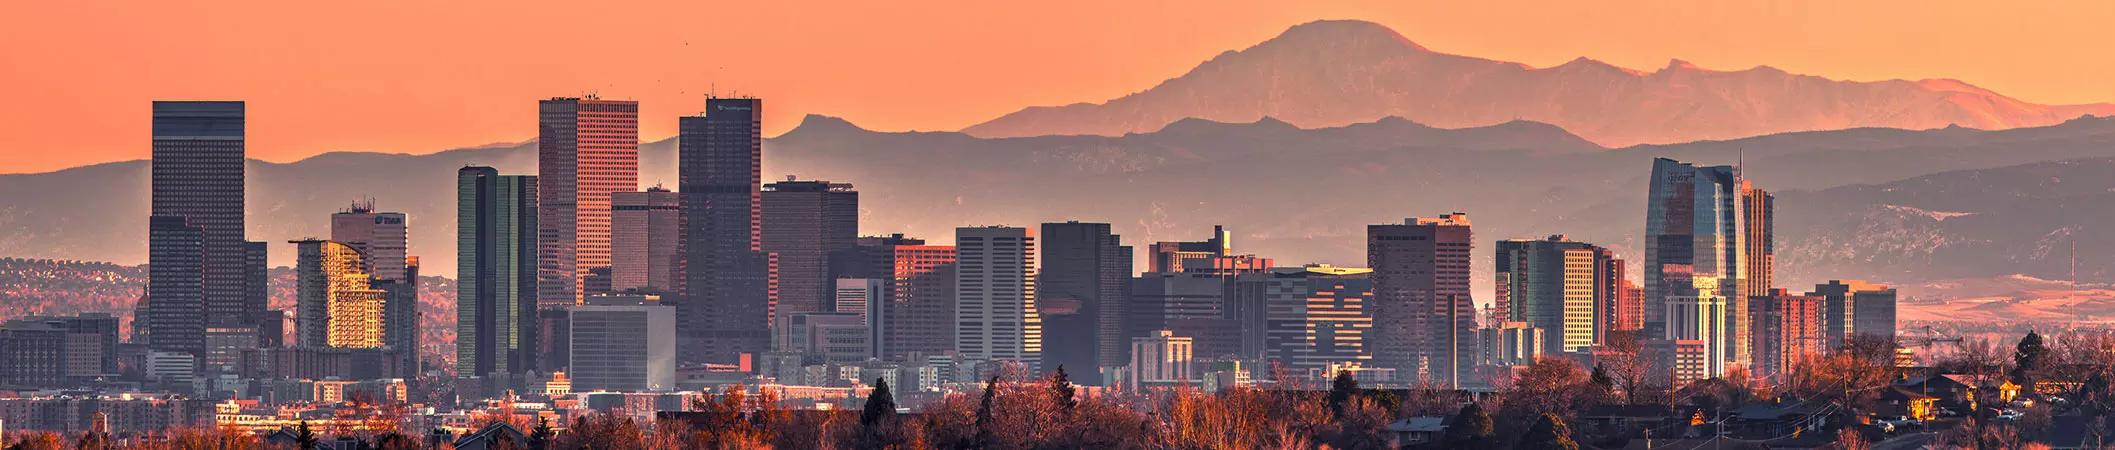 Landscape of Denver and the mountains at sunset